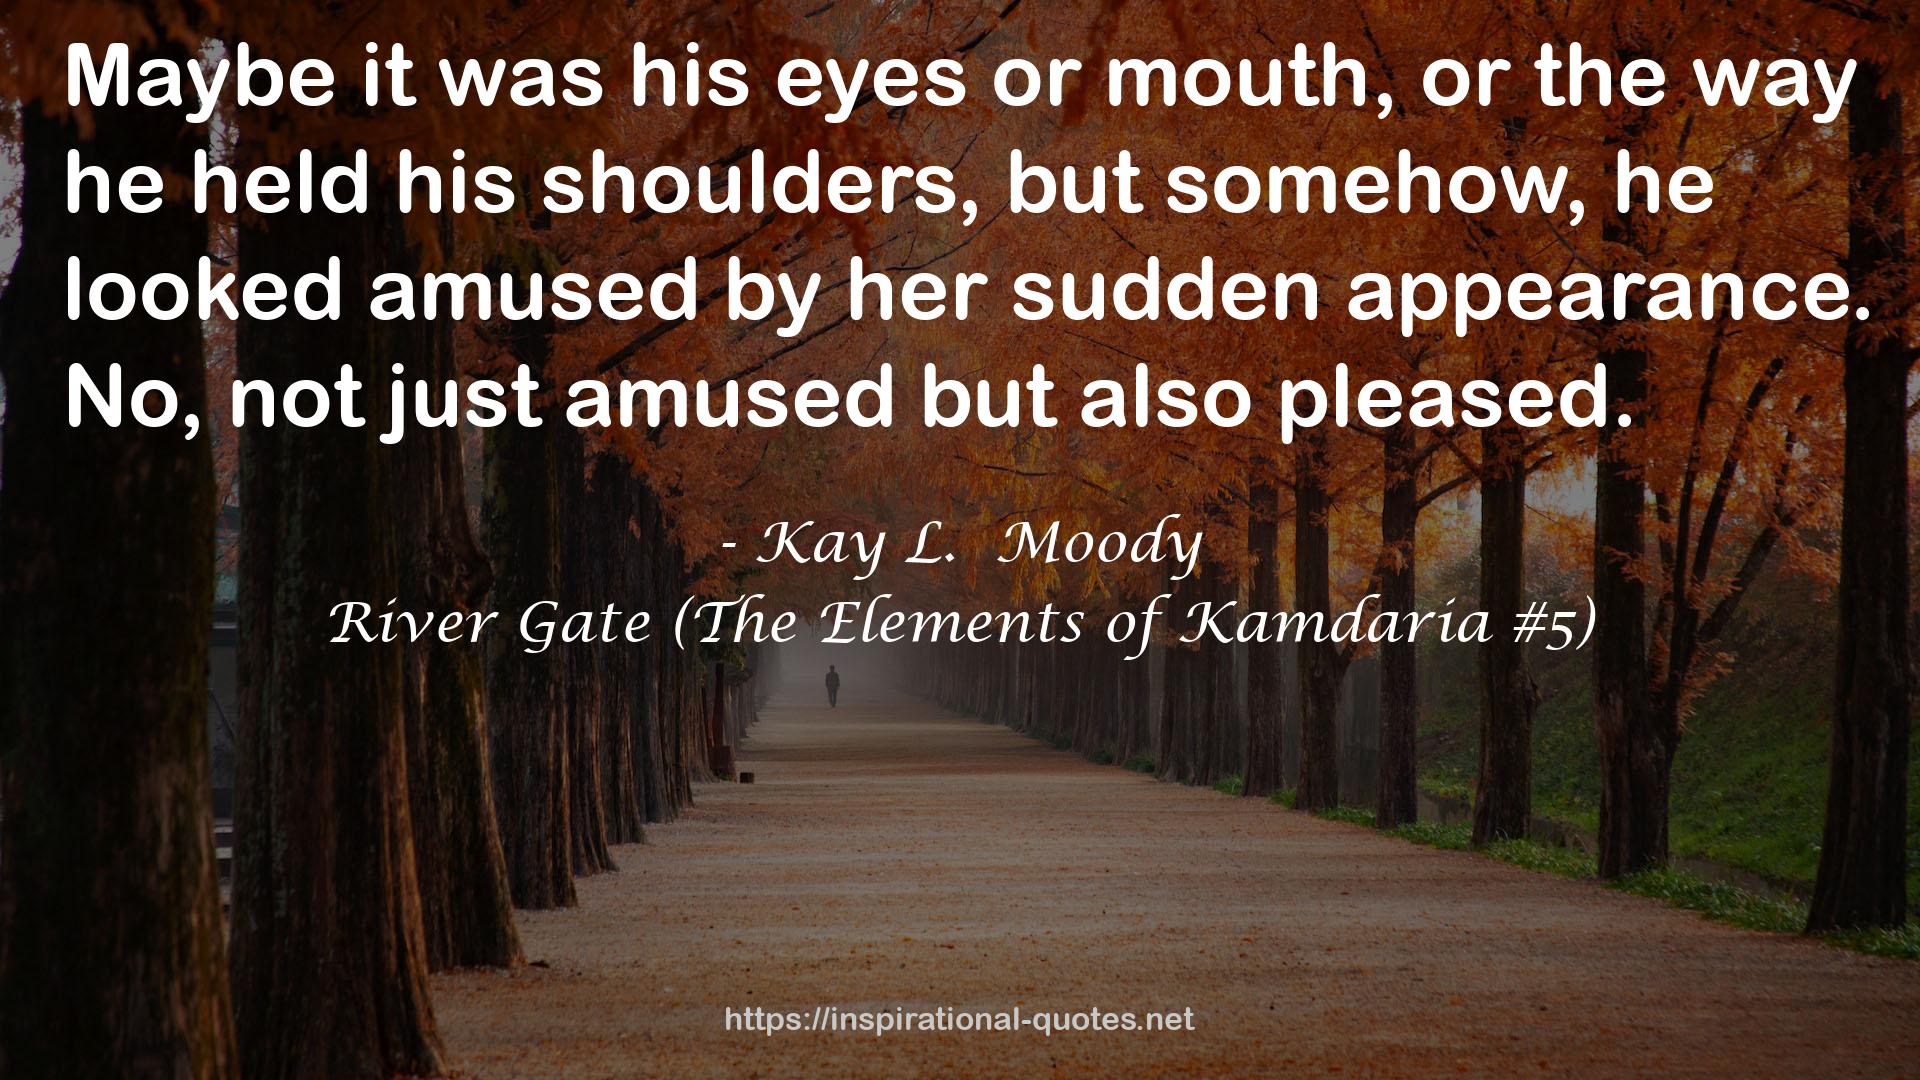 River Gate (The Elements of Kamdaria #5) QUOTES